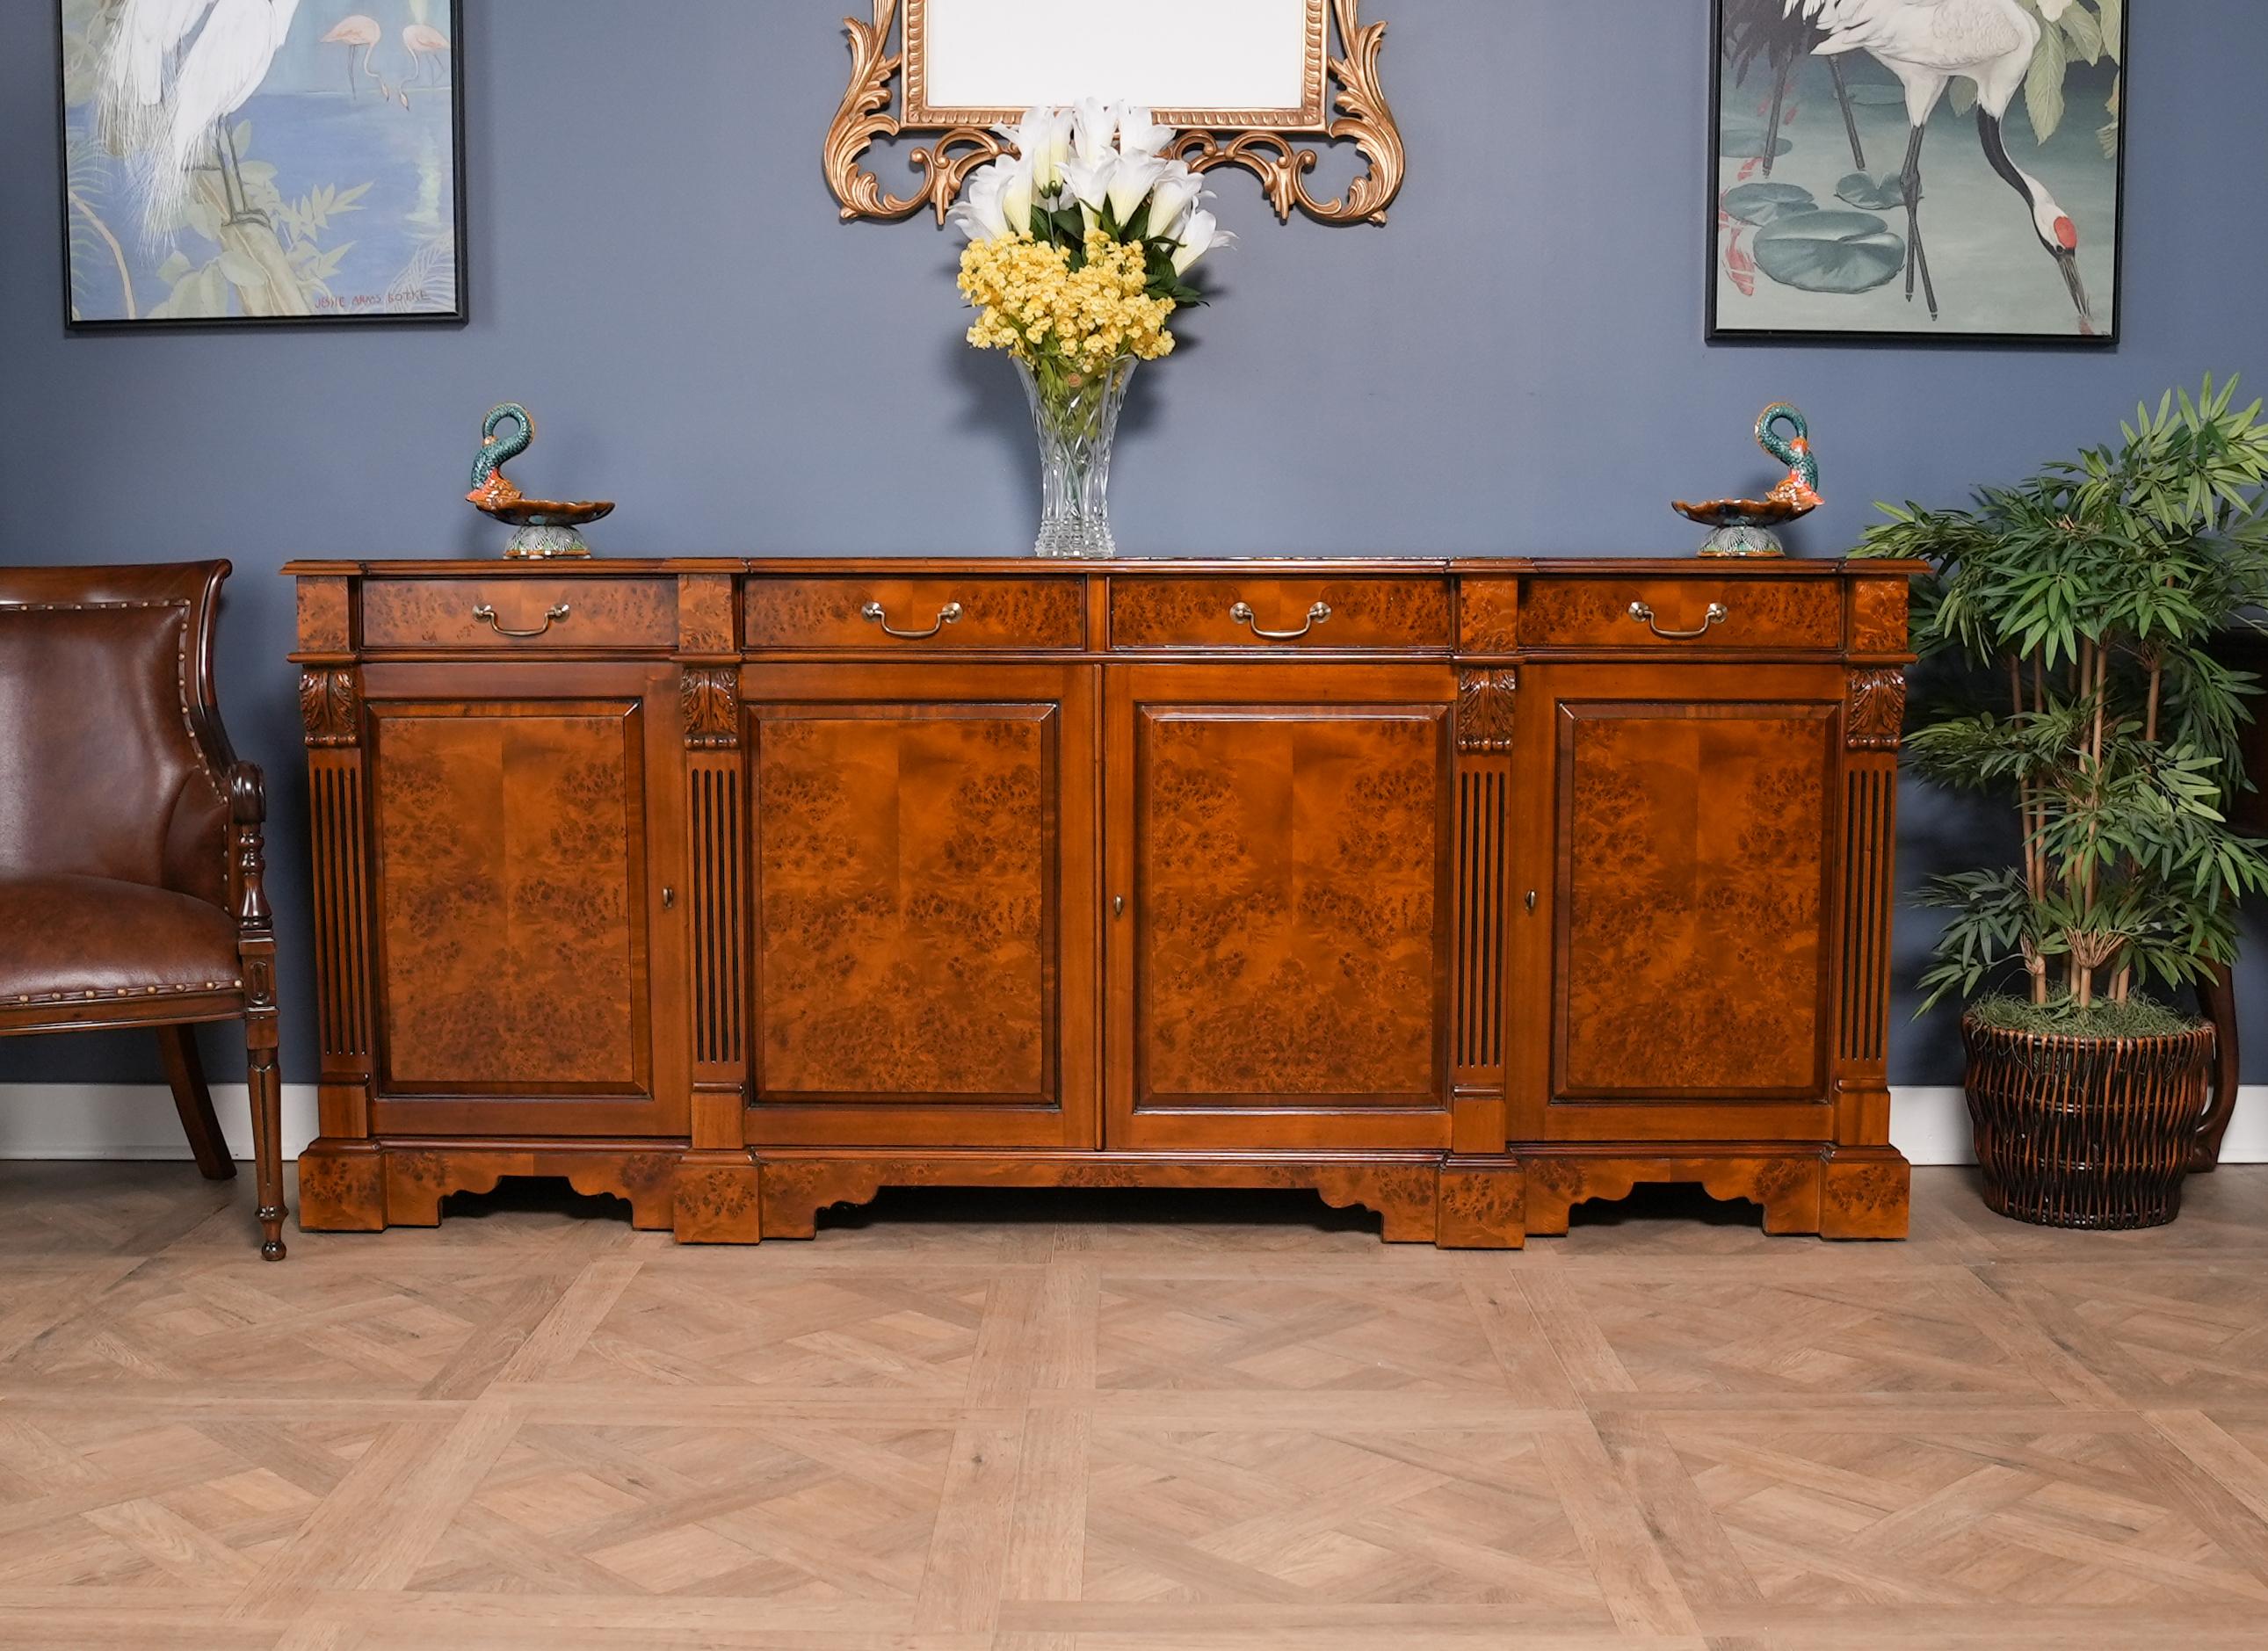 The Burled Penhurst Sideboard is a great addition to the dining room or office. A matching china closet and other associated pieces in the Penhurst family allow you to decorate an entire room in this style. The Burled Penhurst Sideboard features